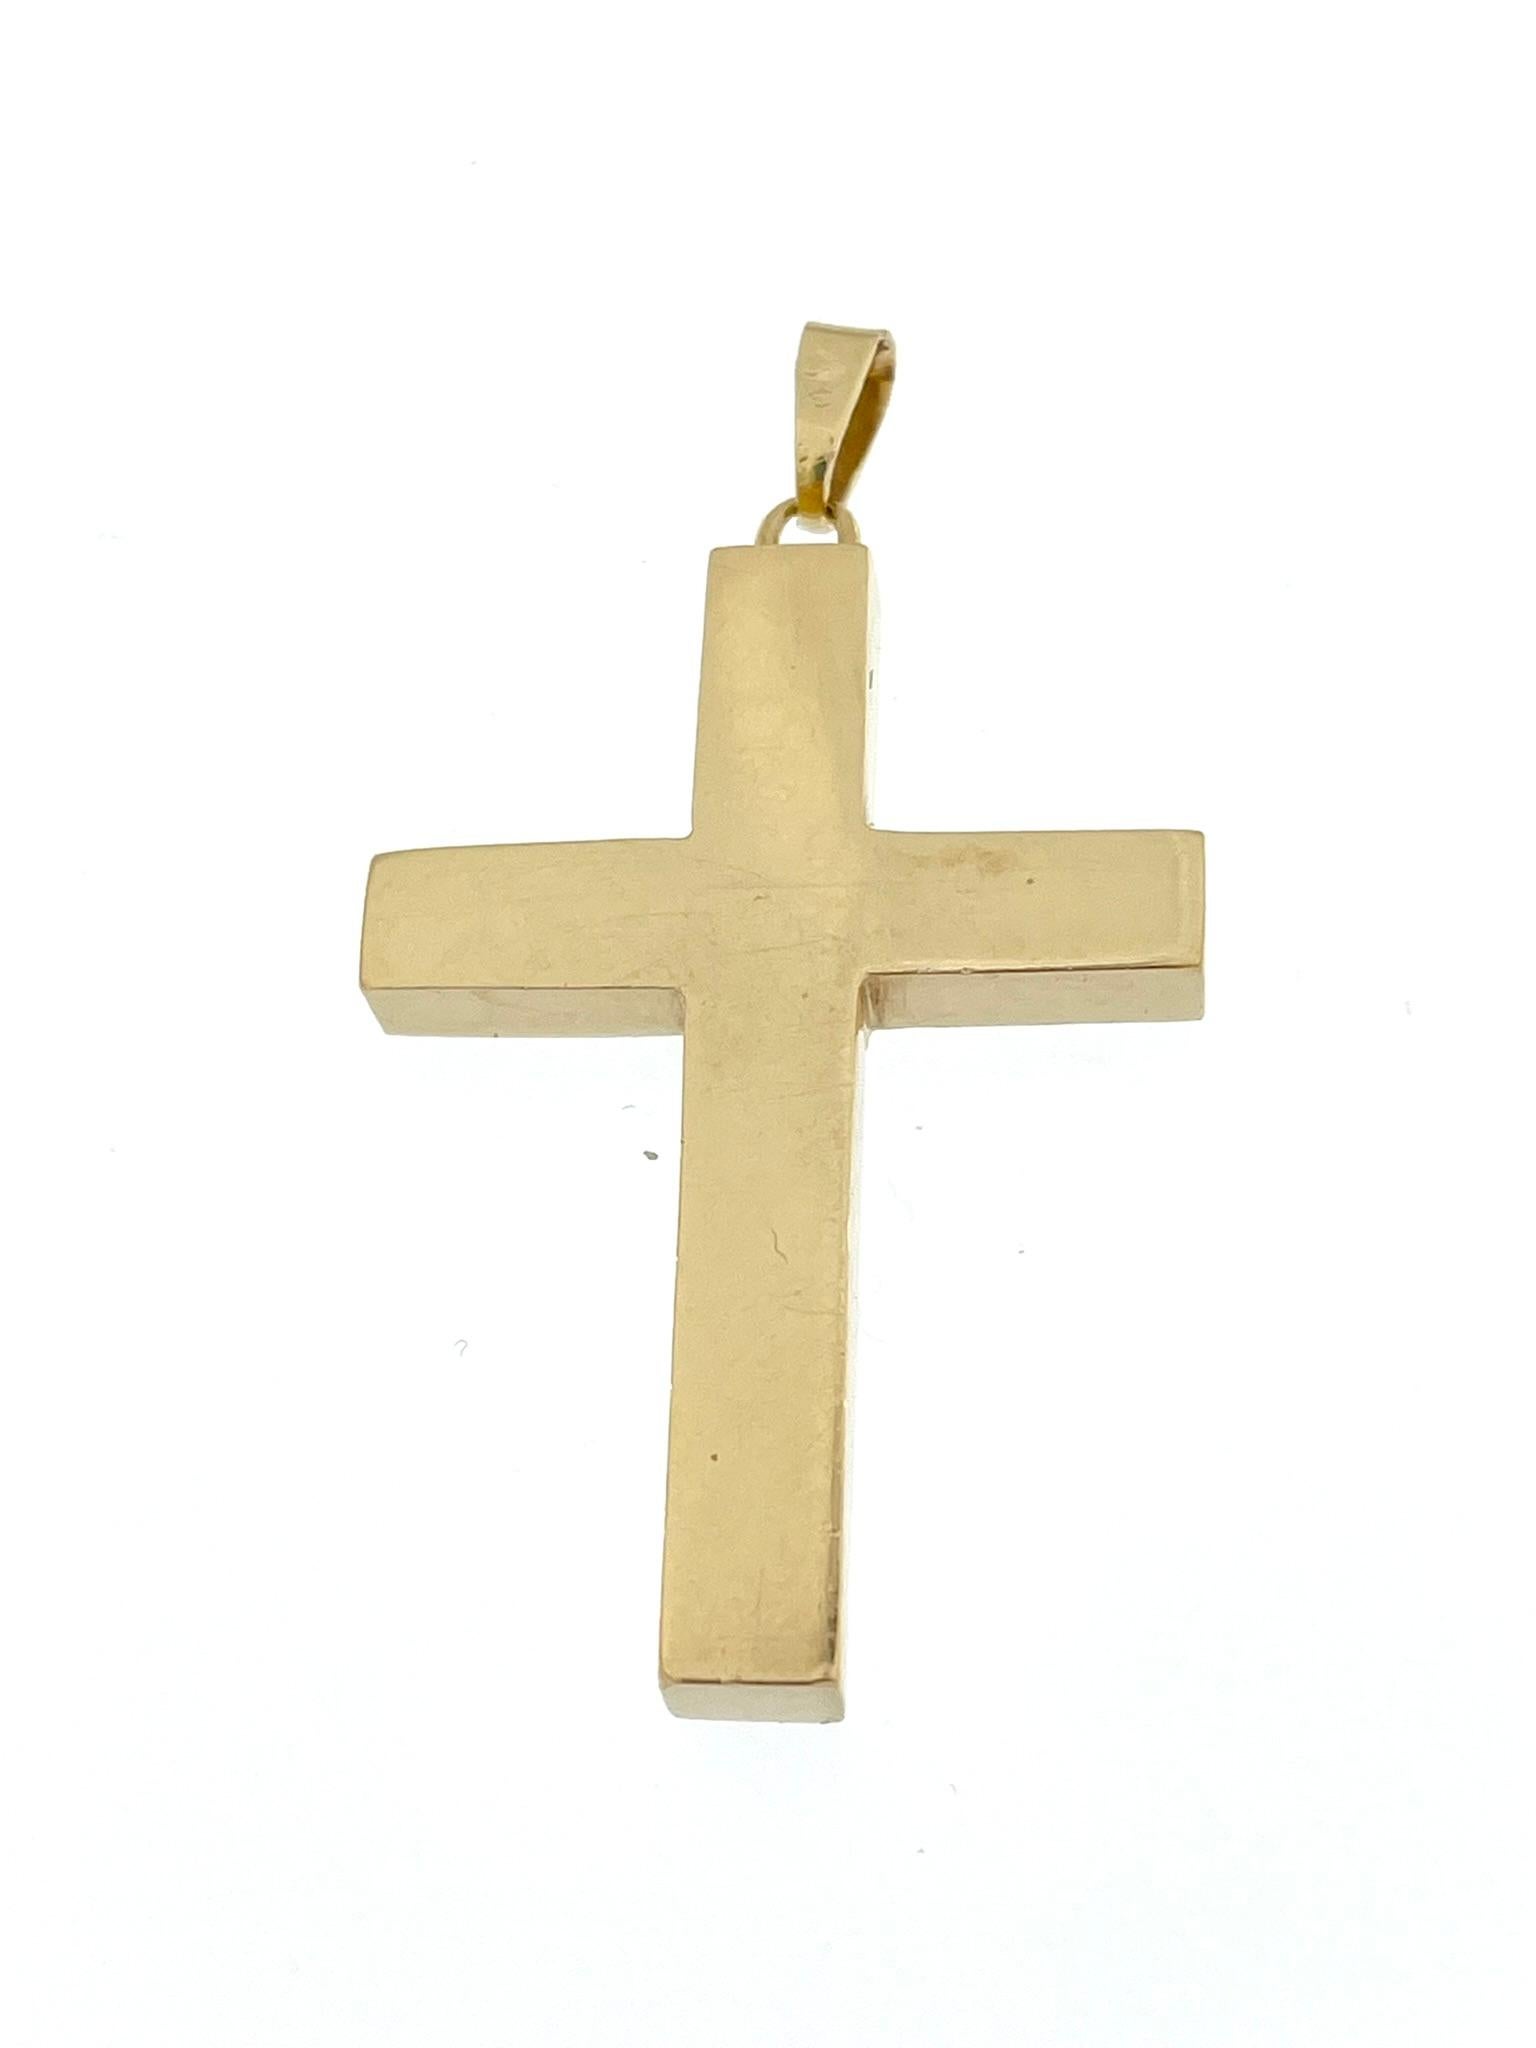 Modern Vintage French Cross 18 karat Yellow Gold with Geometric Patterns For Sale